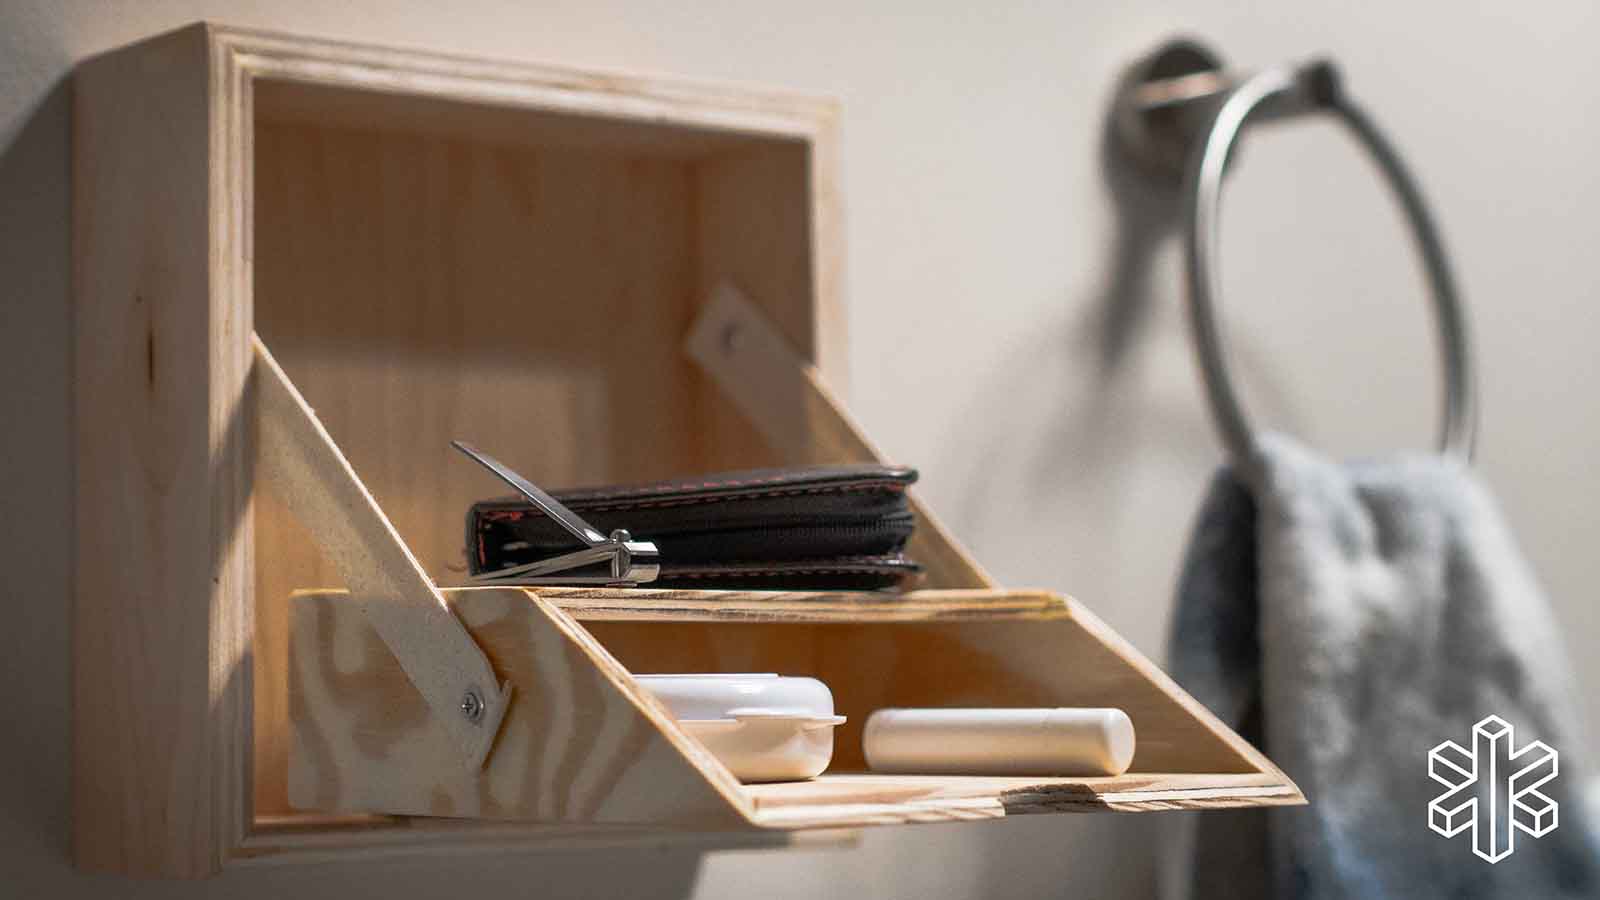 wooden box with pull-out tray containing personal items